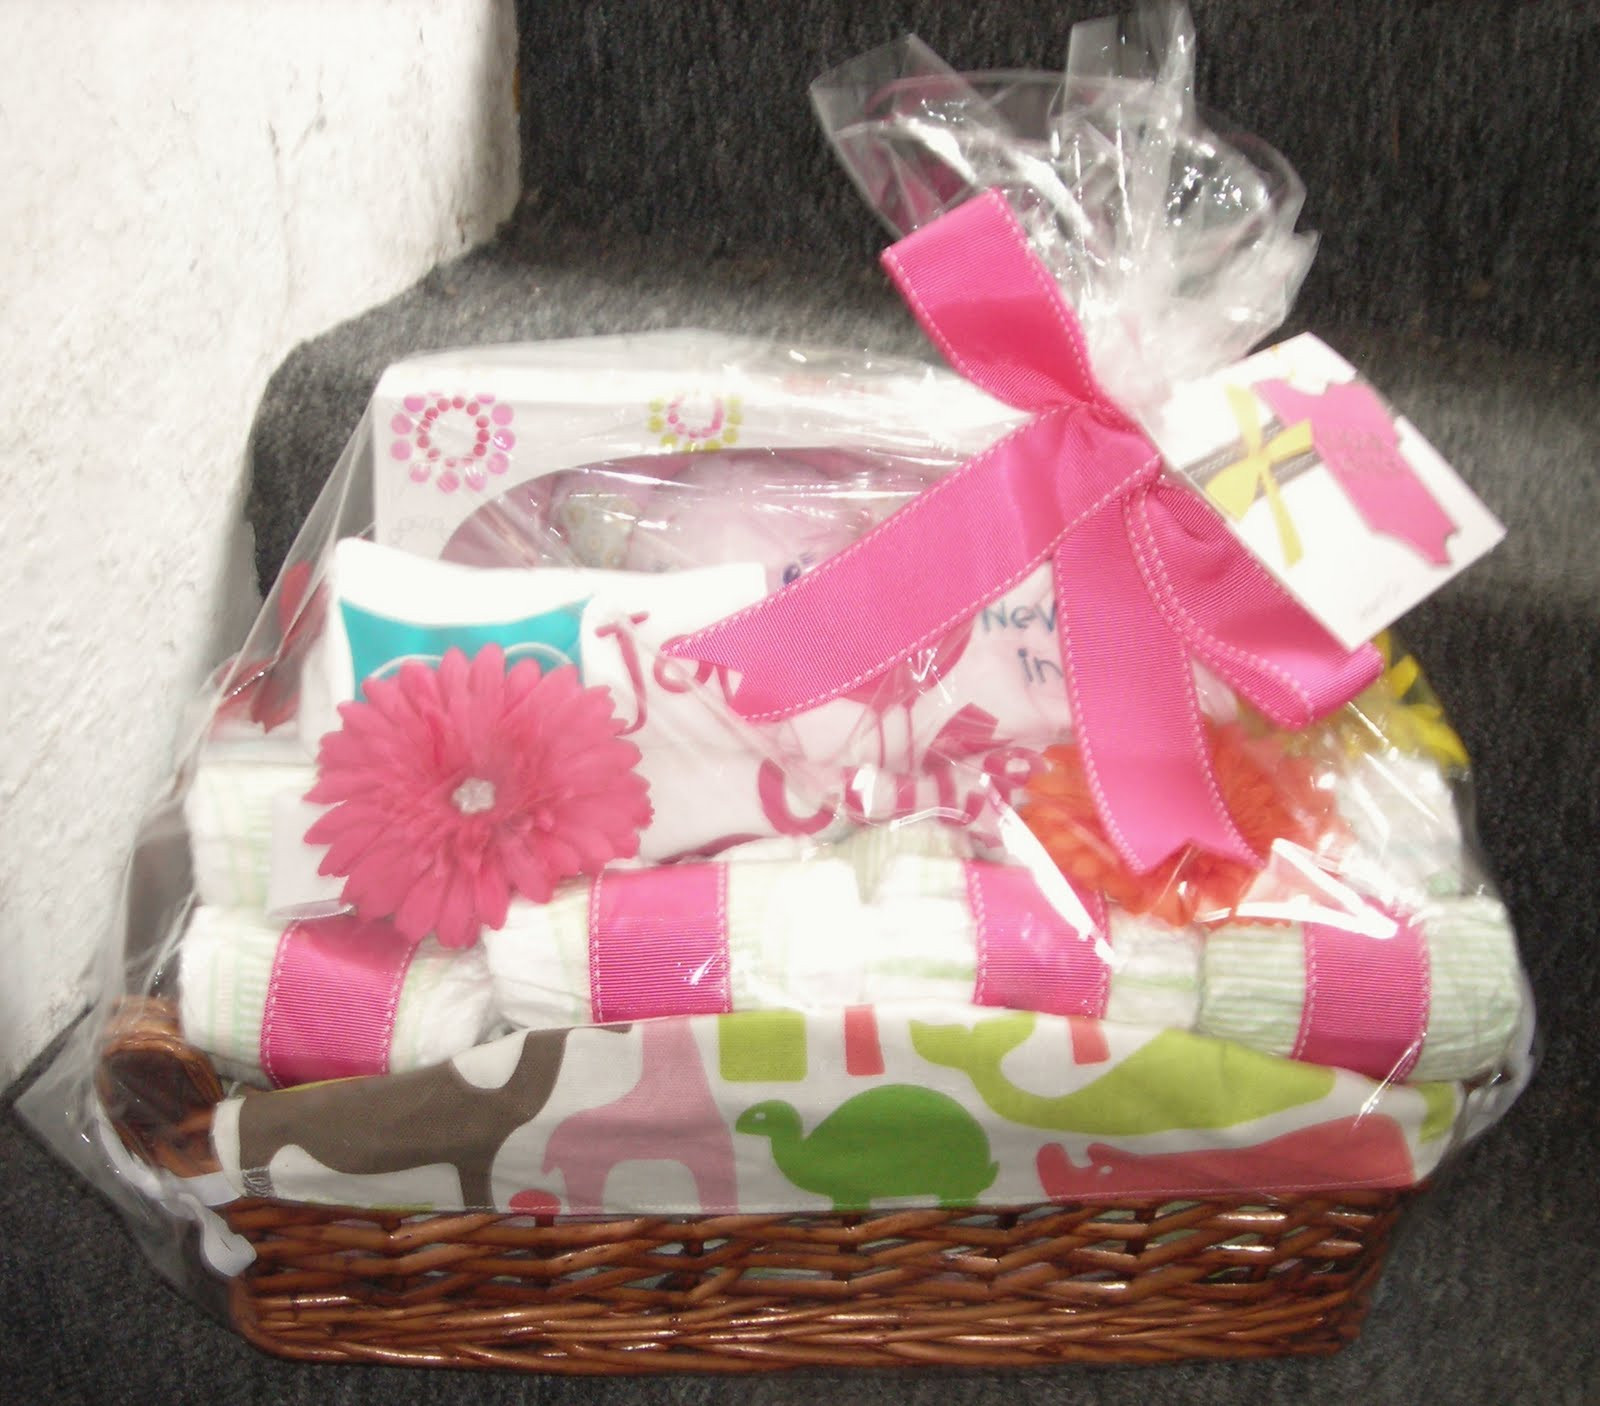 Gift Ideas Baby Girl
 Life in the Motherhood Baby Shower Gift Basket For a